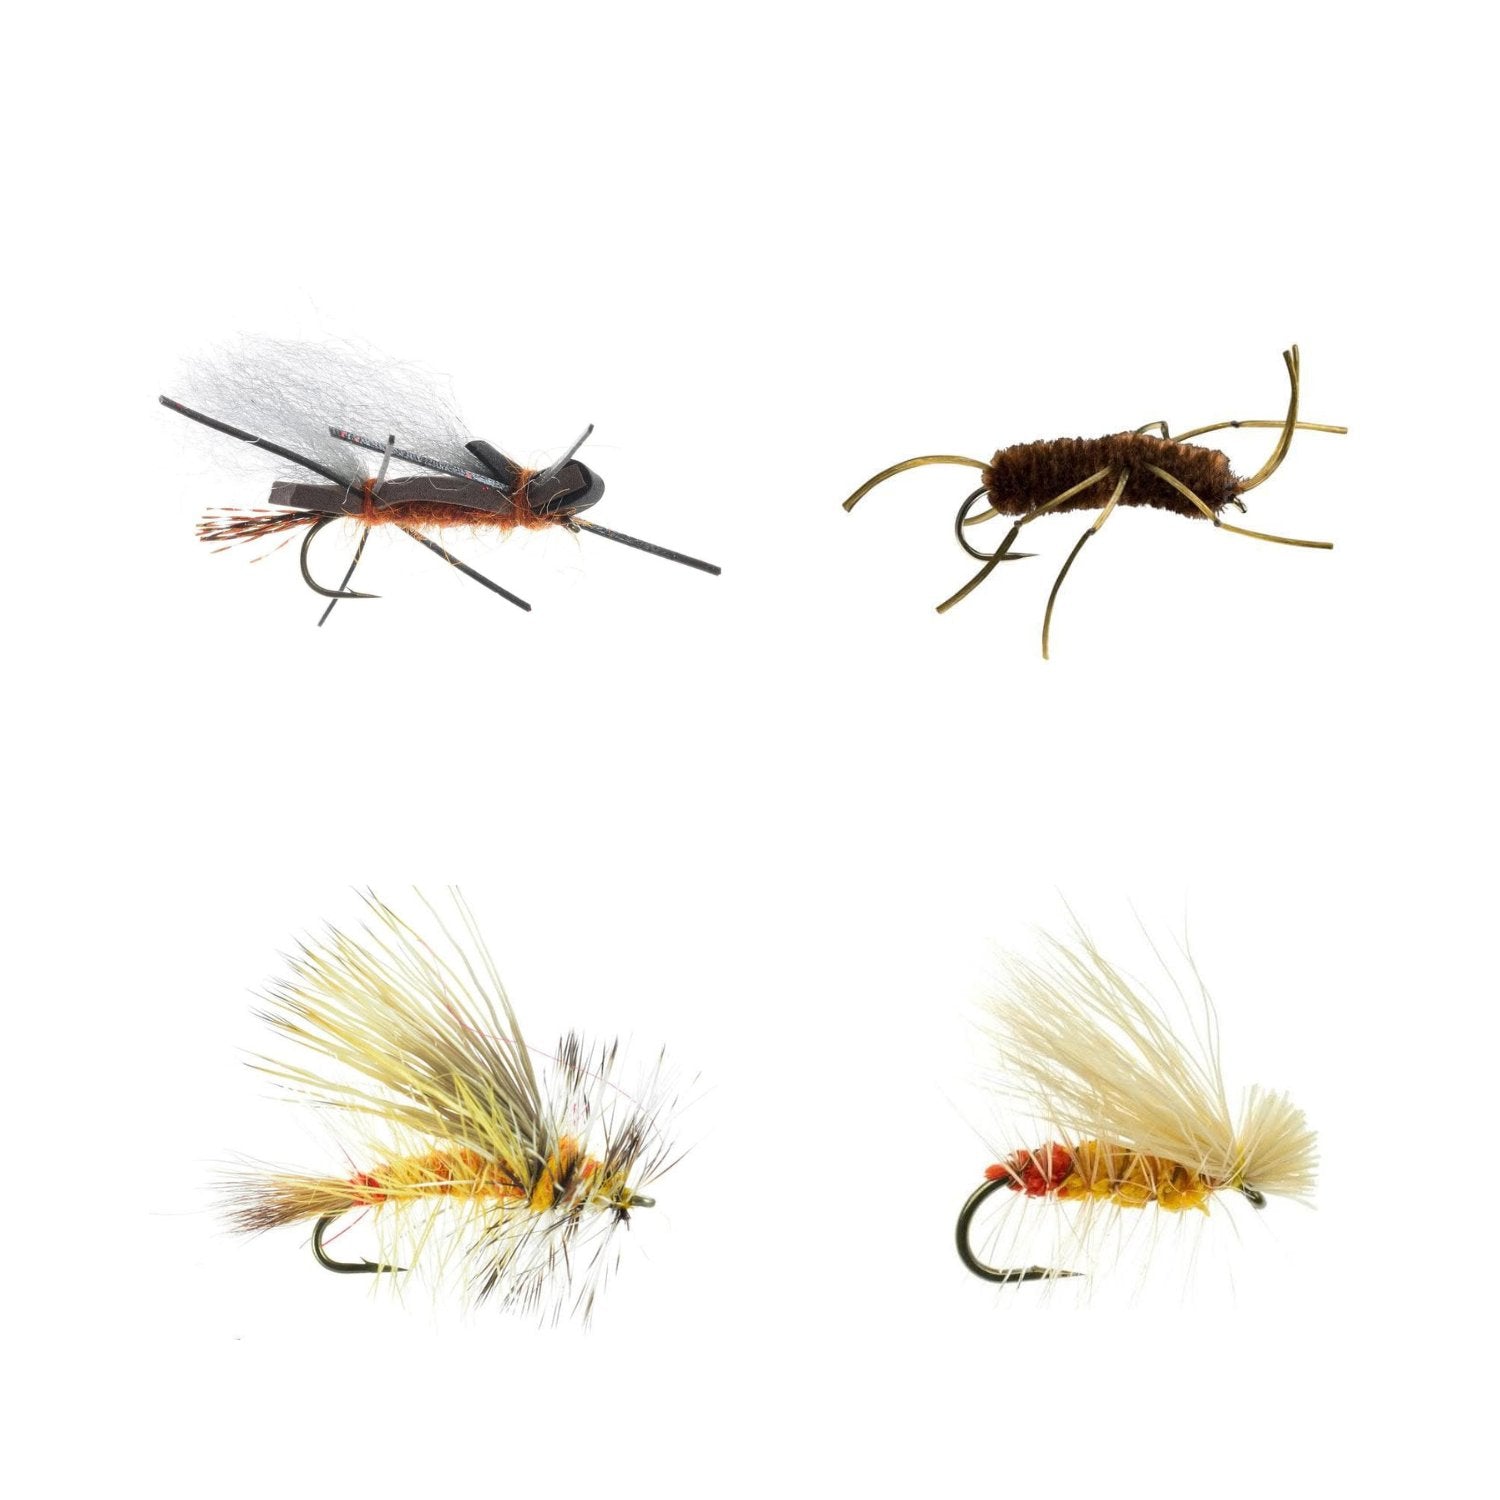 Shop Stonefly Flies: Dries, Nymphs, and More